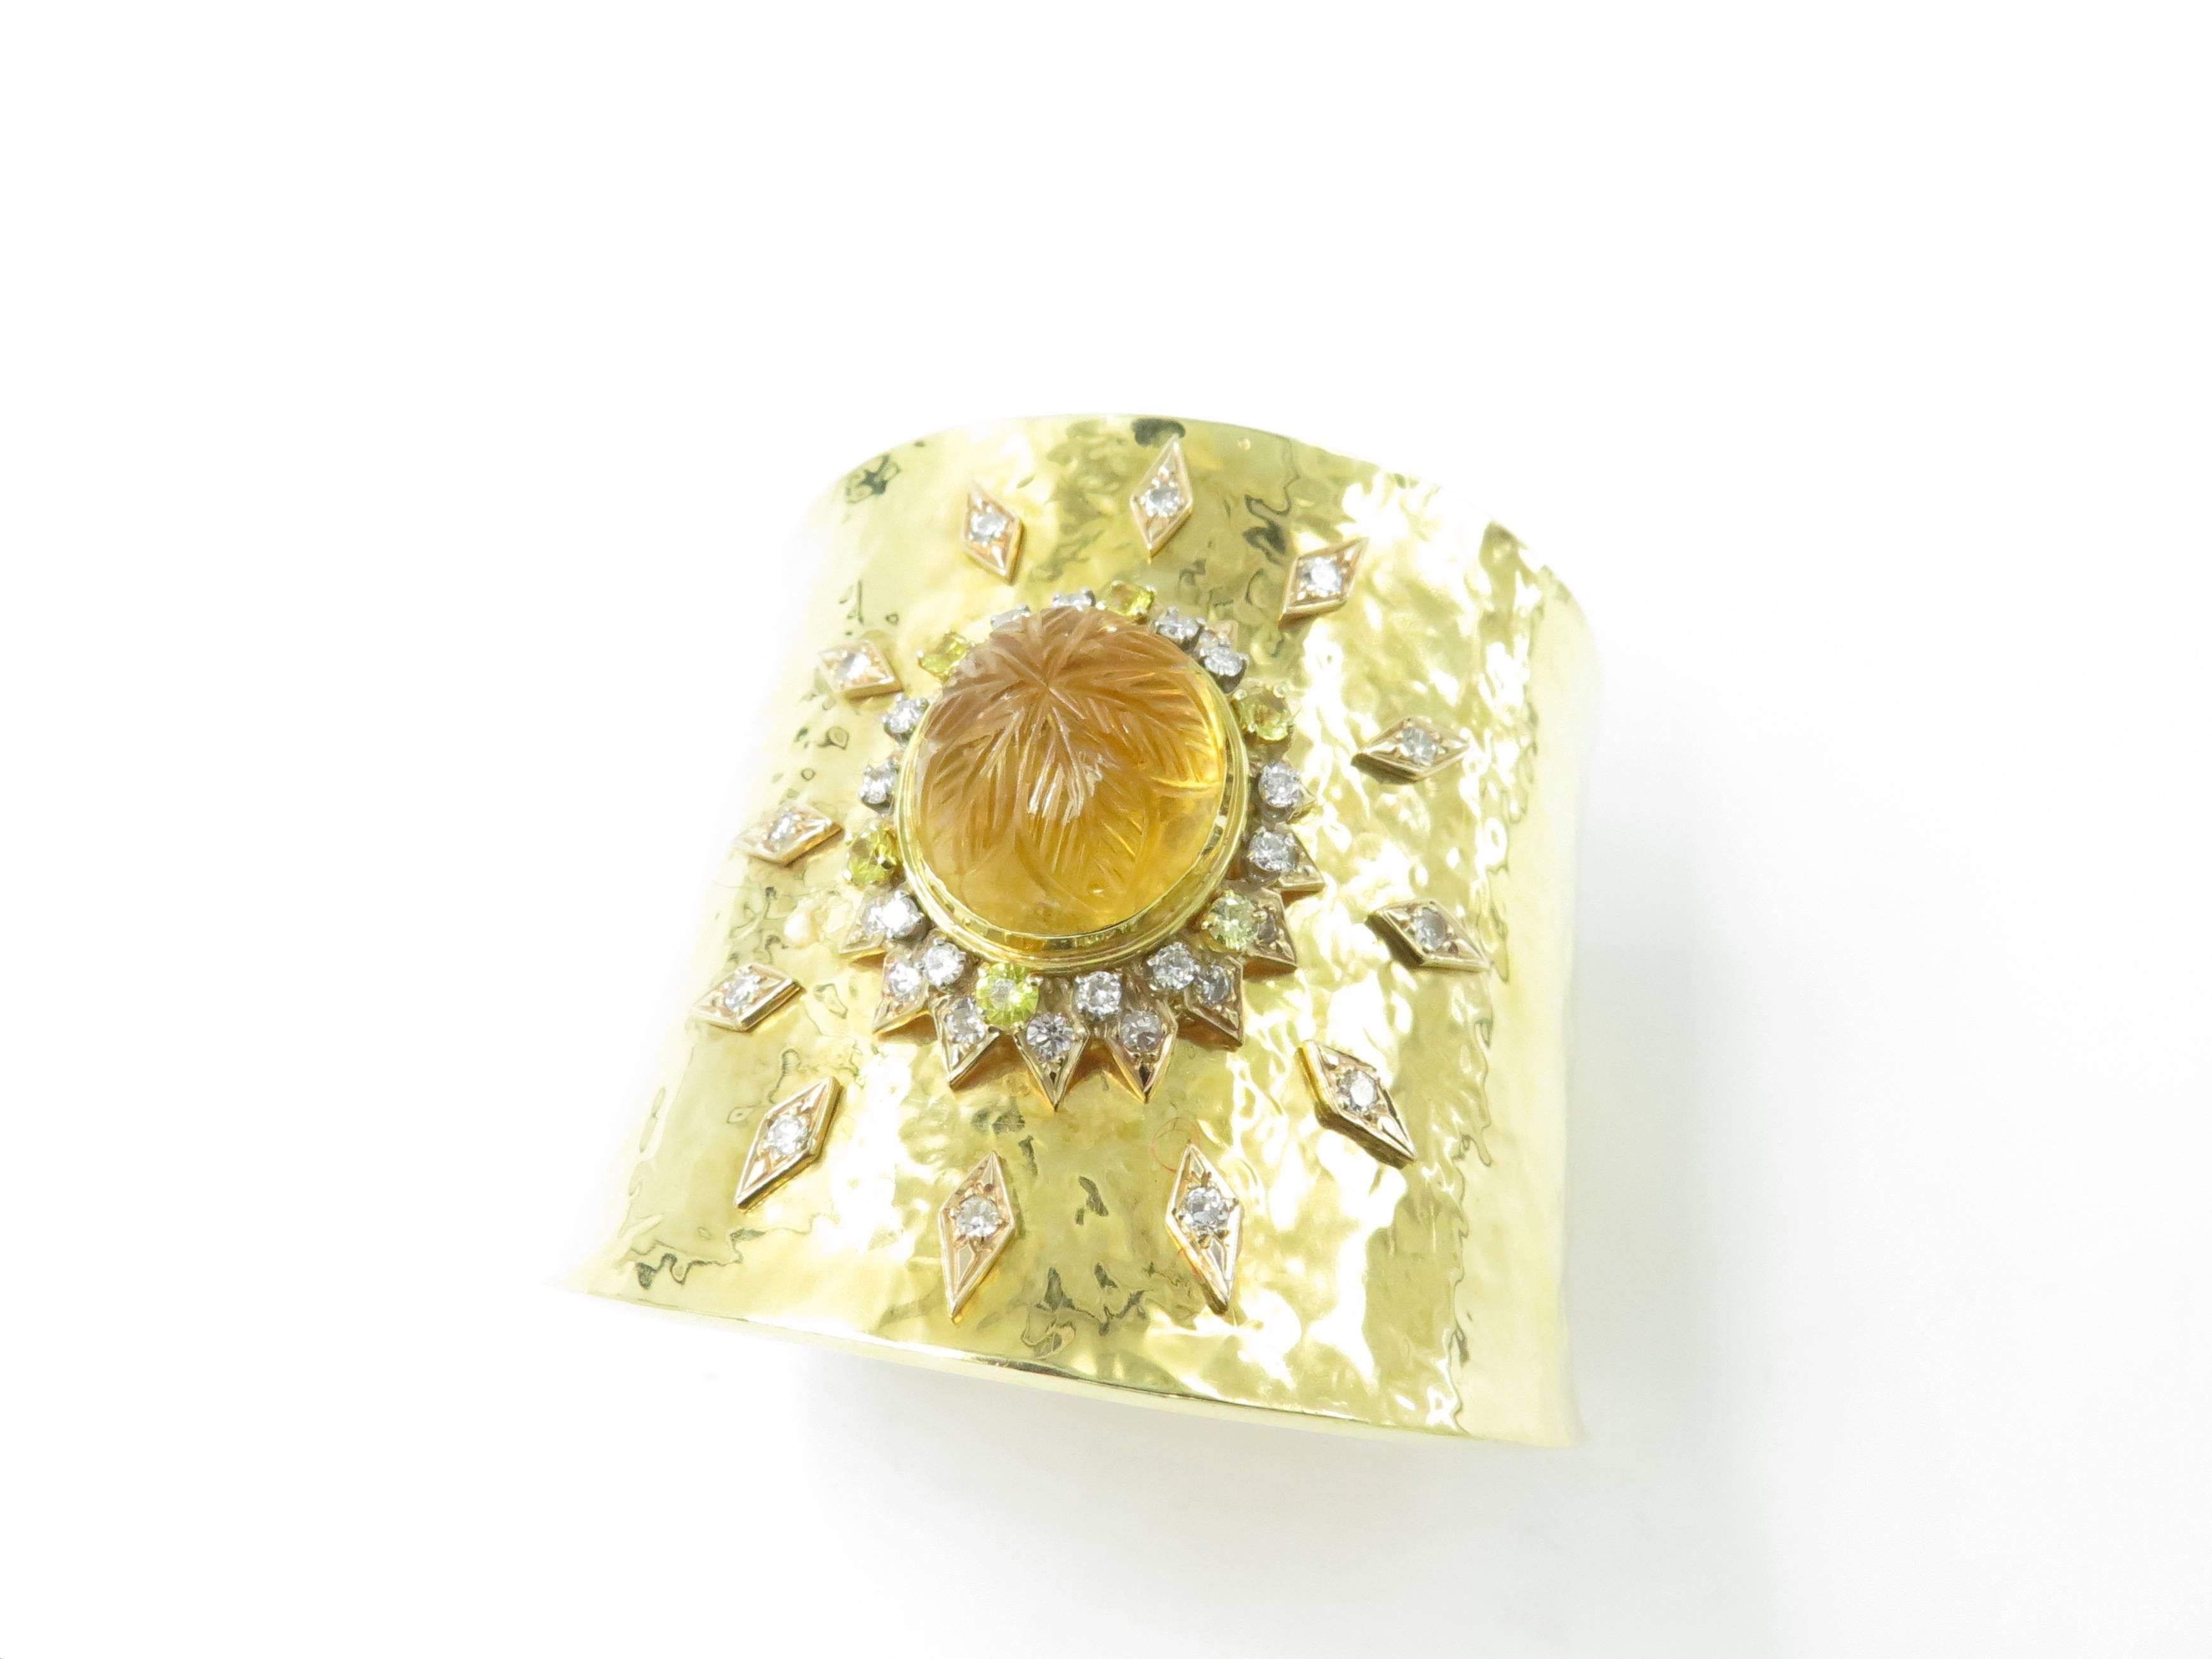 An 18 karat yellow gold, citrine, diamond and yellow sapphire cuff bracelet, Circa 1970. The hammered gold decorated with a sun burst motif, centering an oval carved cabochon citrine, measuring approximately 18.00 x 15.50. within a circular diamond